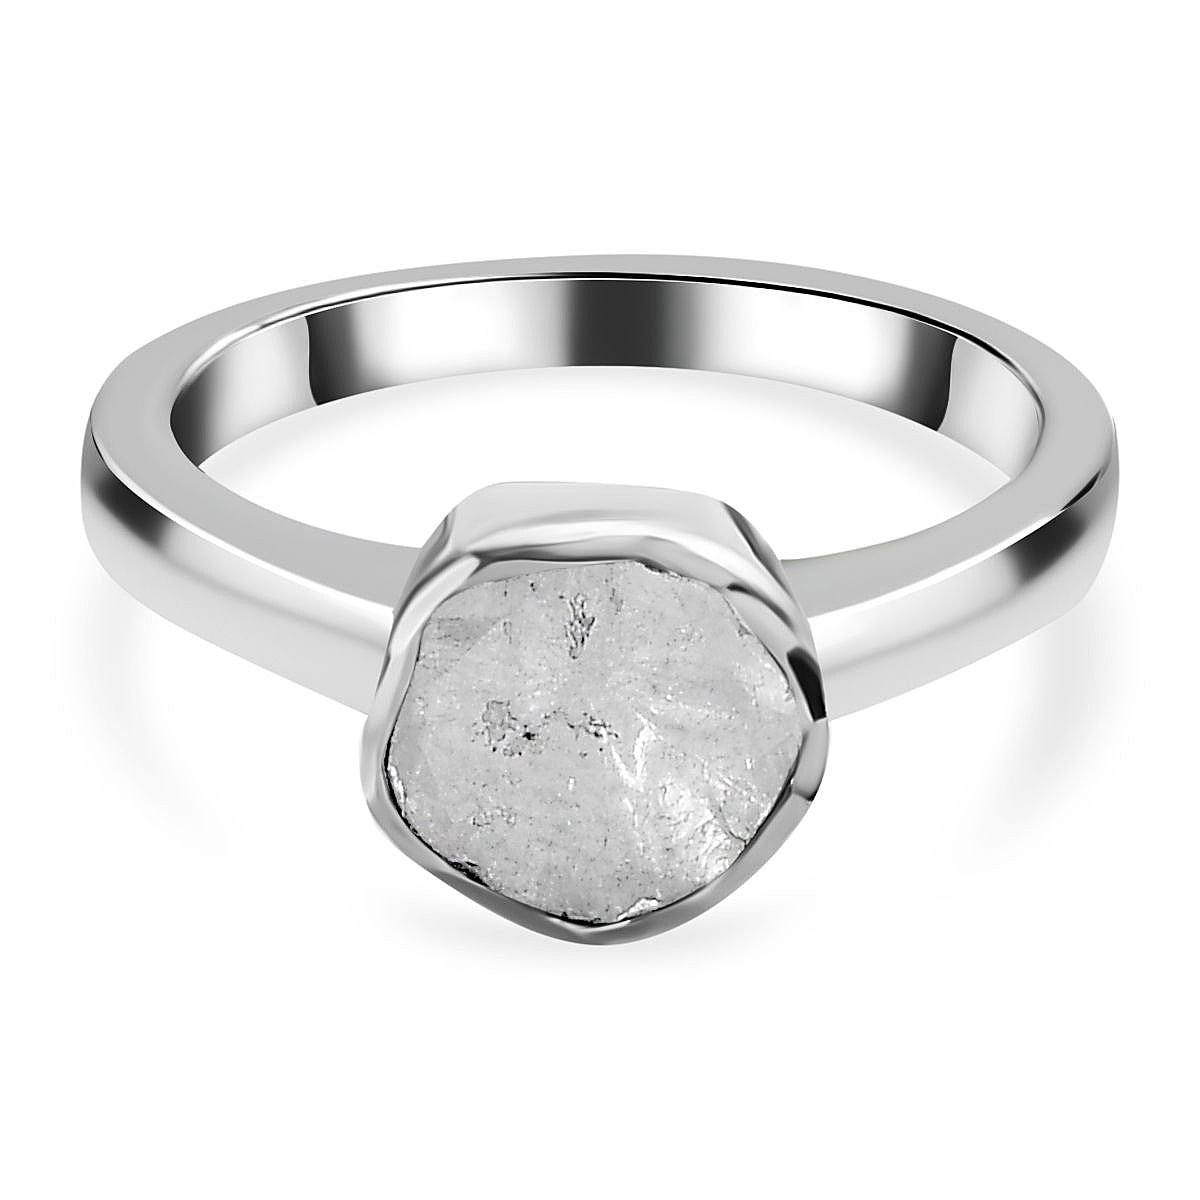 Royal Bali Collection - Artisan Crafted Natural Polki Diamond Solitaire Ring in Platinum Overlay Sterling Silver 0.50 Ct.